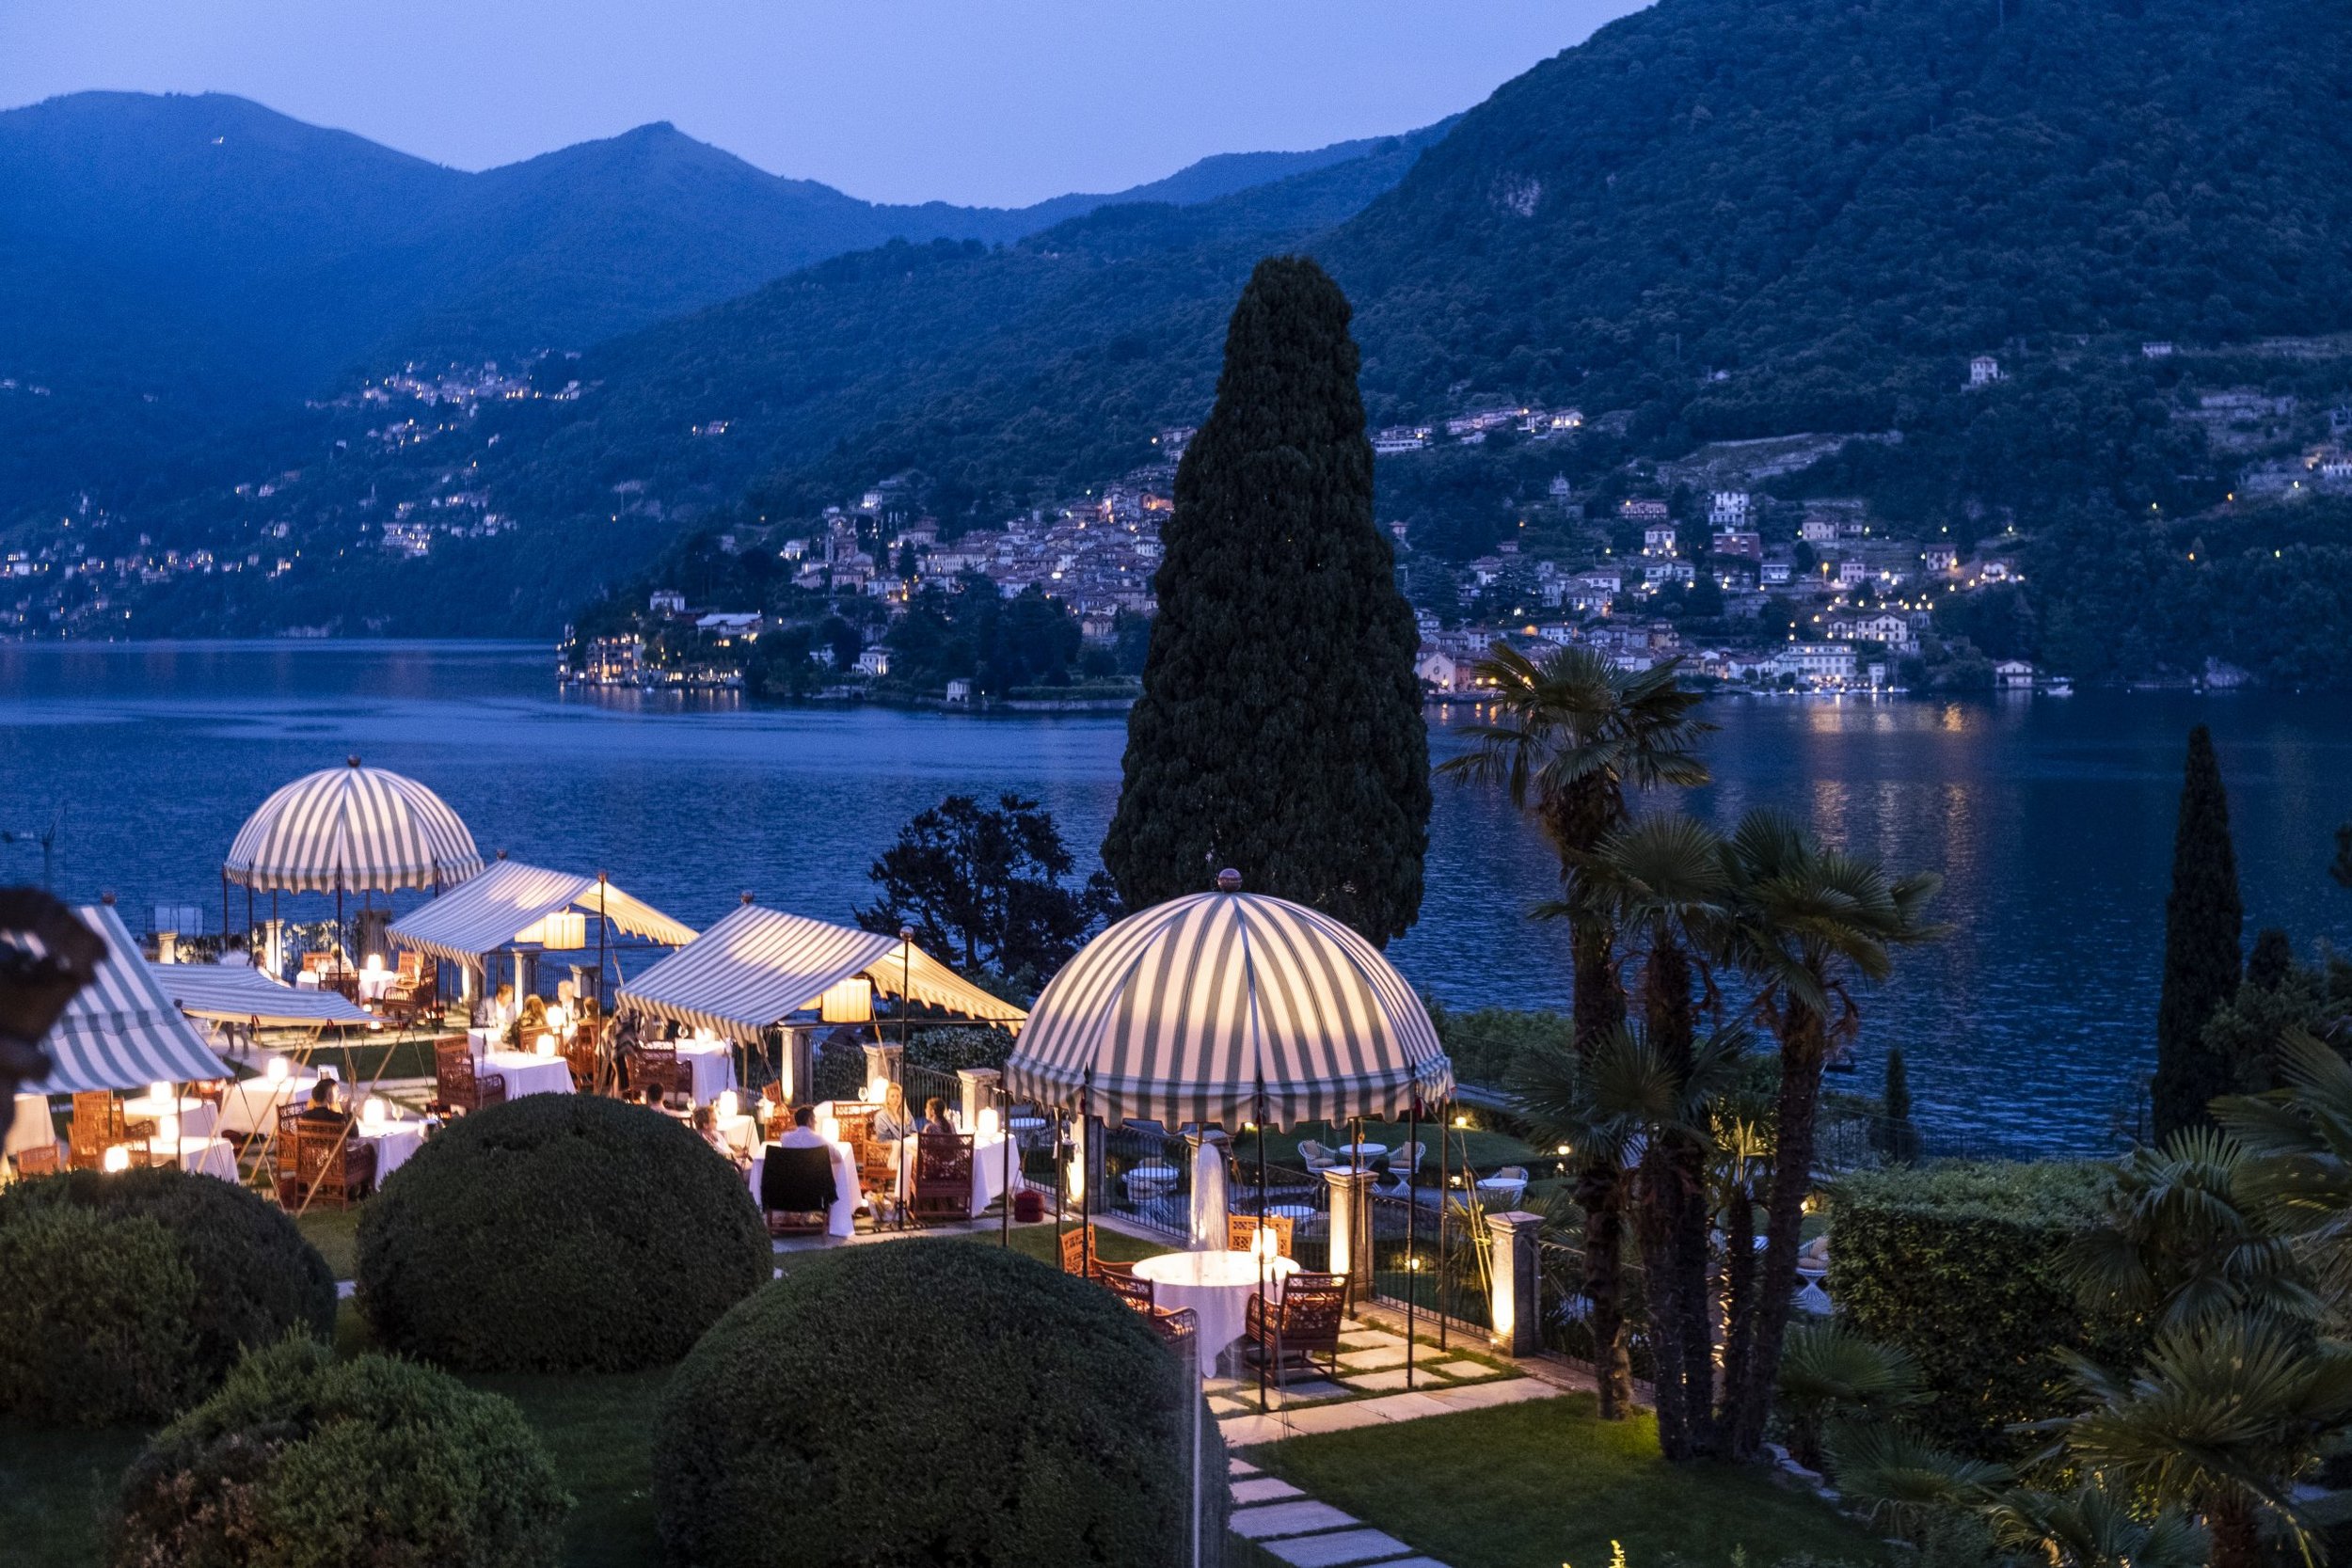 67-View-over-the-restaurant-terrace-and-lake-by-night-©-Enrico-Costantini-1-scaled.jpg